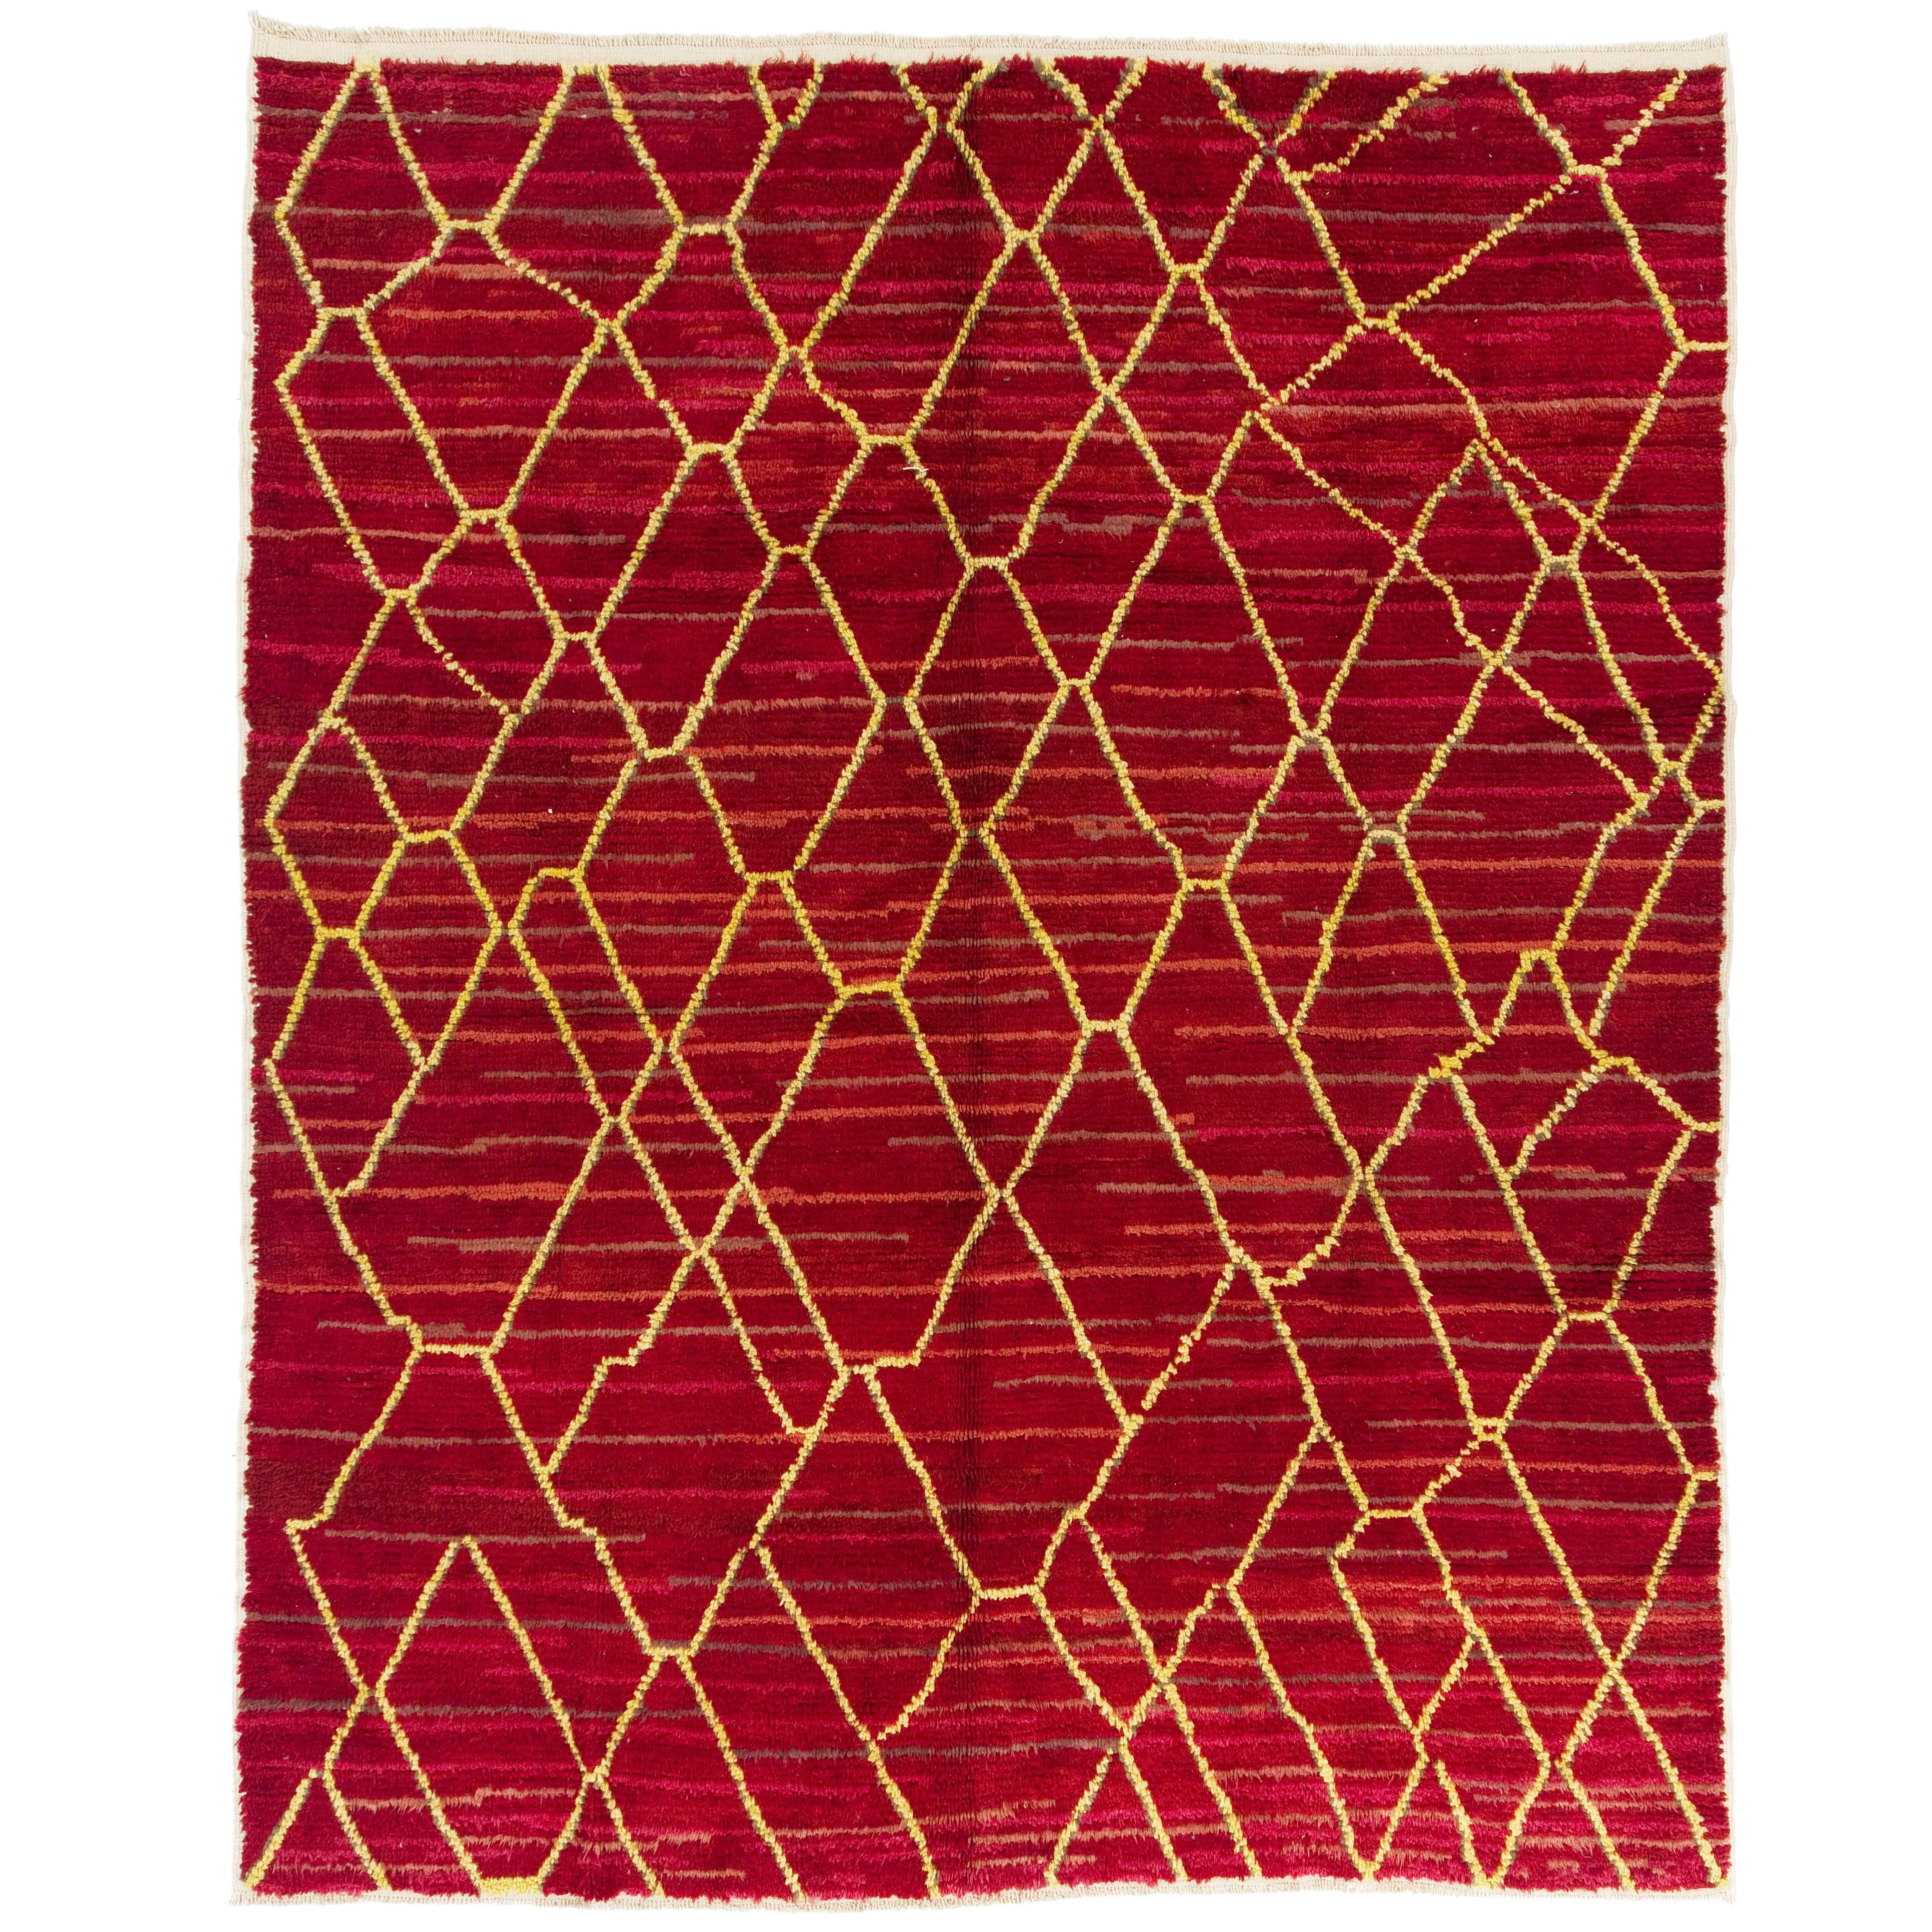 Contemporary Moroccan Wool Rug in Red, Pink and Yellow